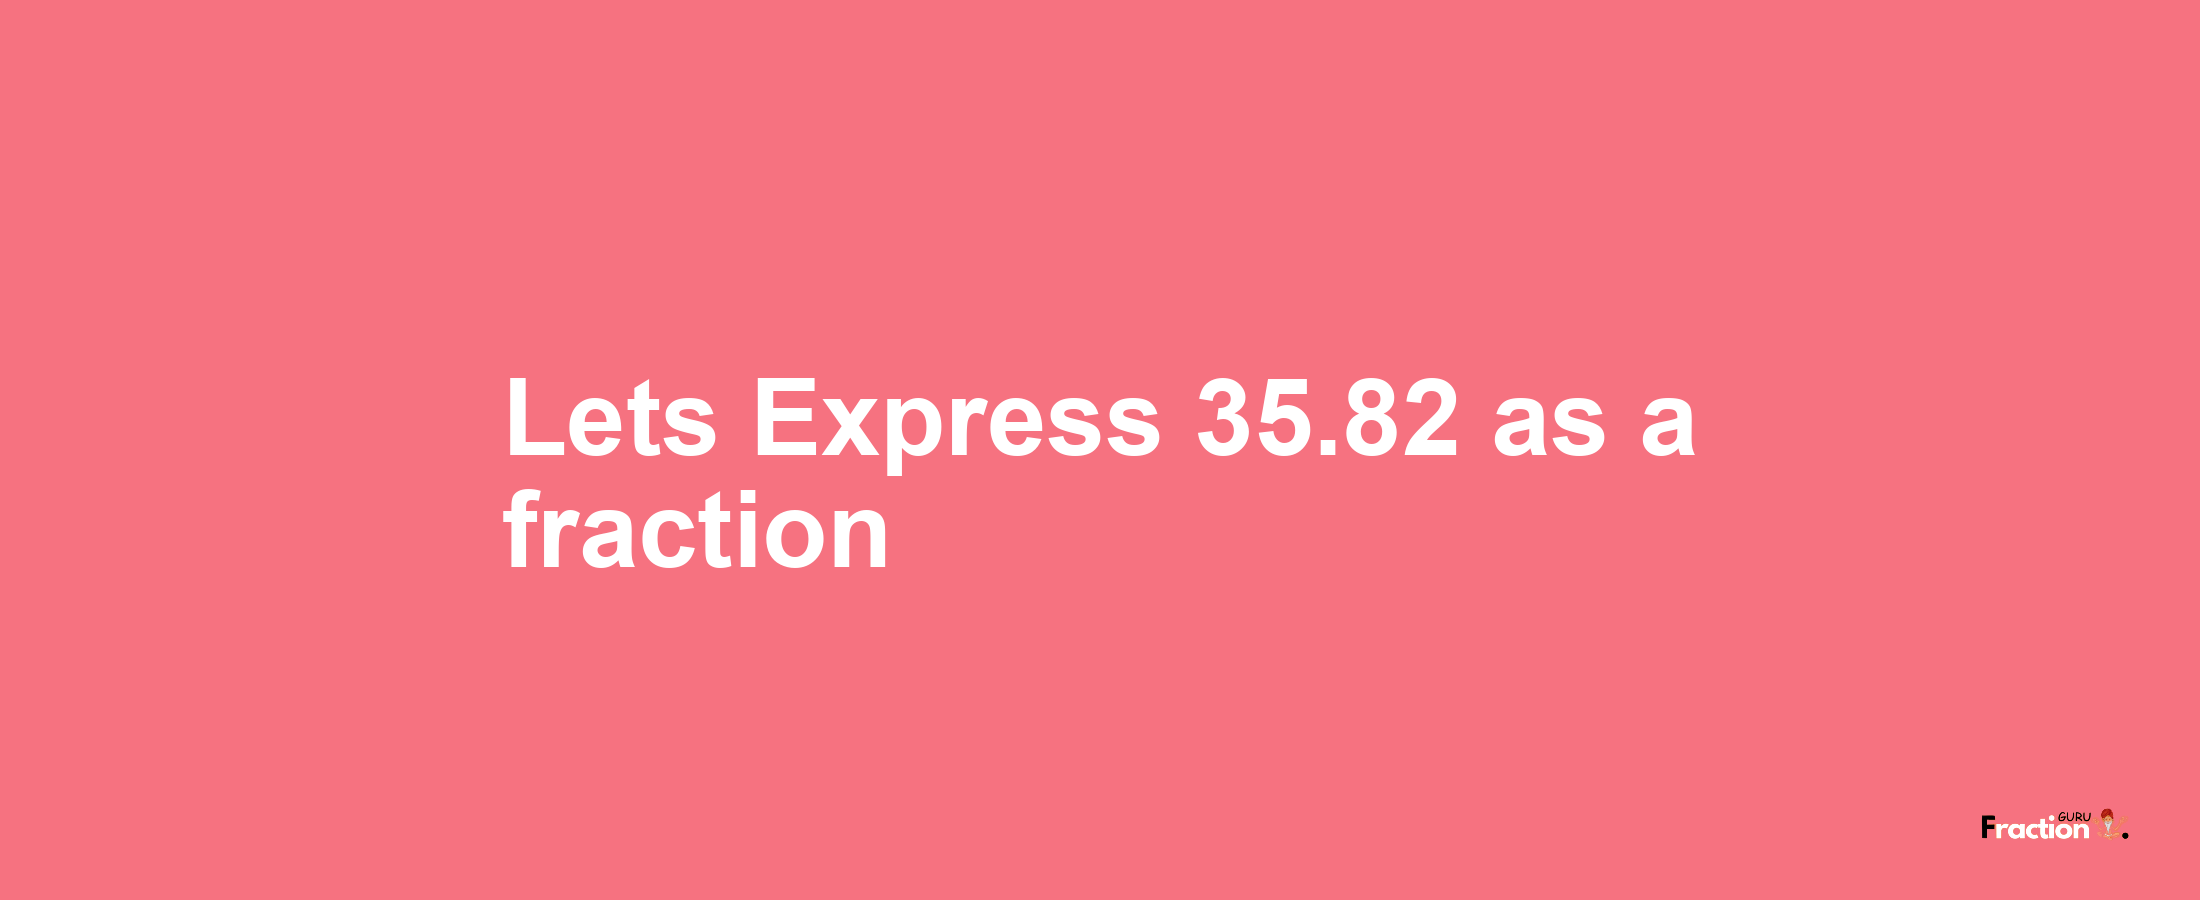 Lets Express 35.82 as afraction